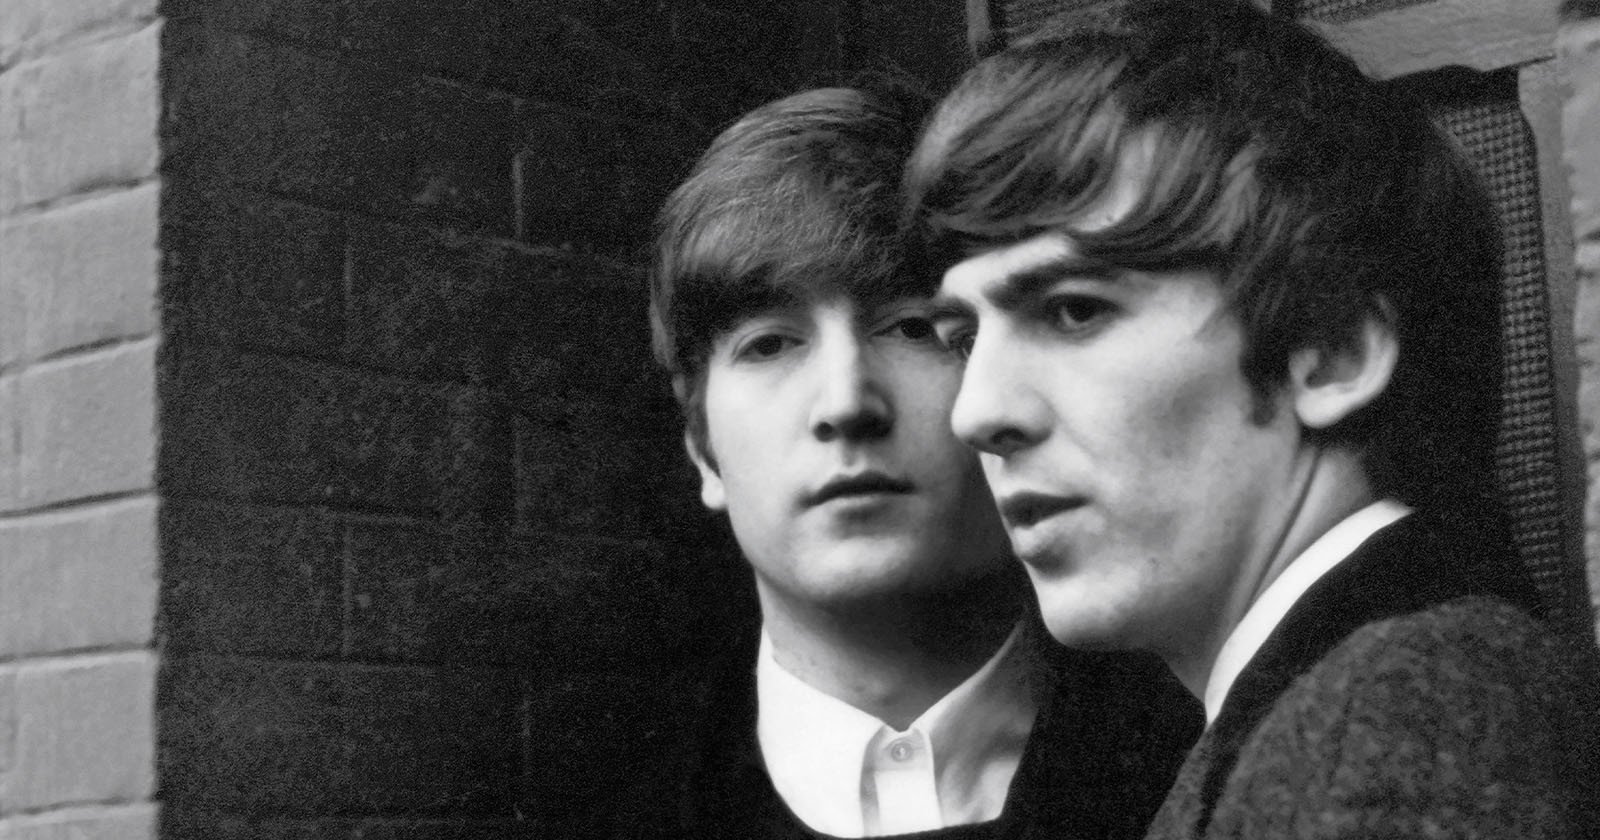 Paul McCartney Finds Lost Photos of the Beatles from the Early 1960s